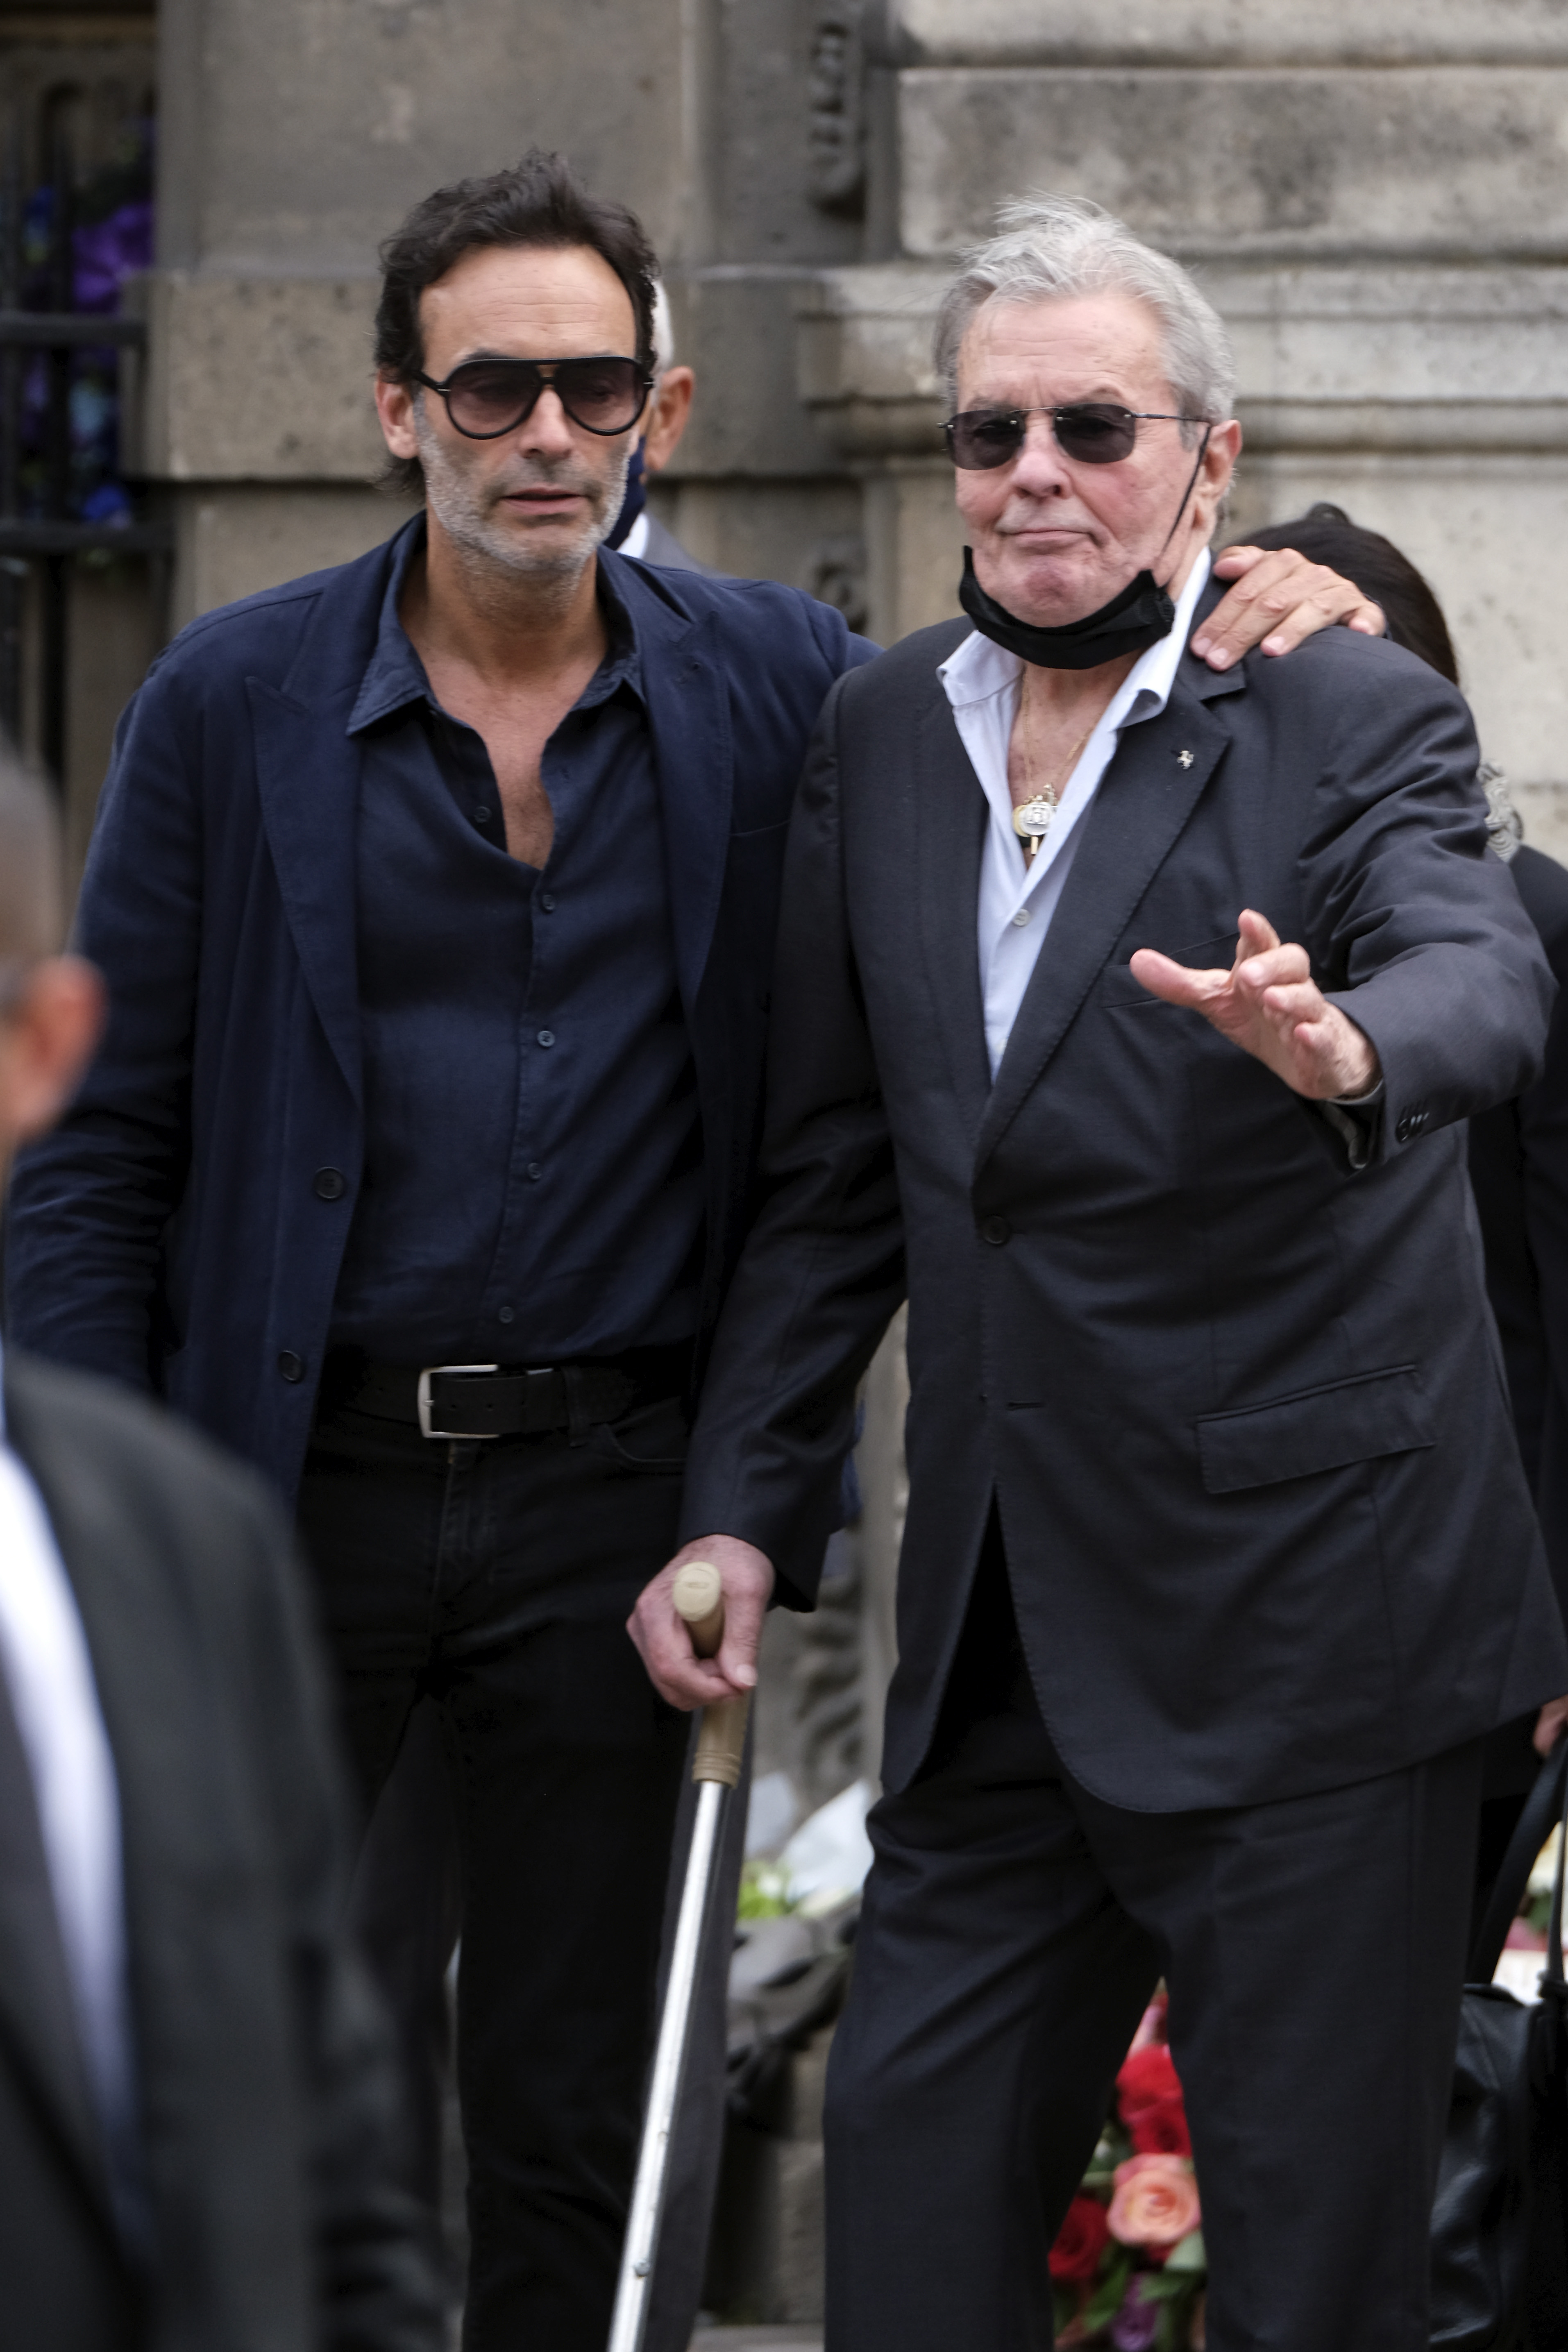 Anthony and Alain Delon at Jean-Paul Belmondo's Funeral in Paris, France on September 10, 2021 | Source: Getty Images